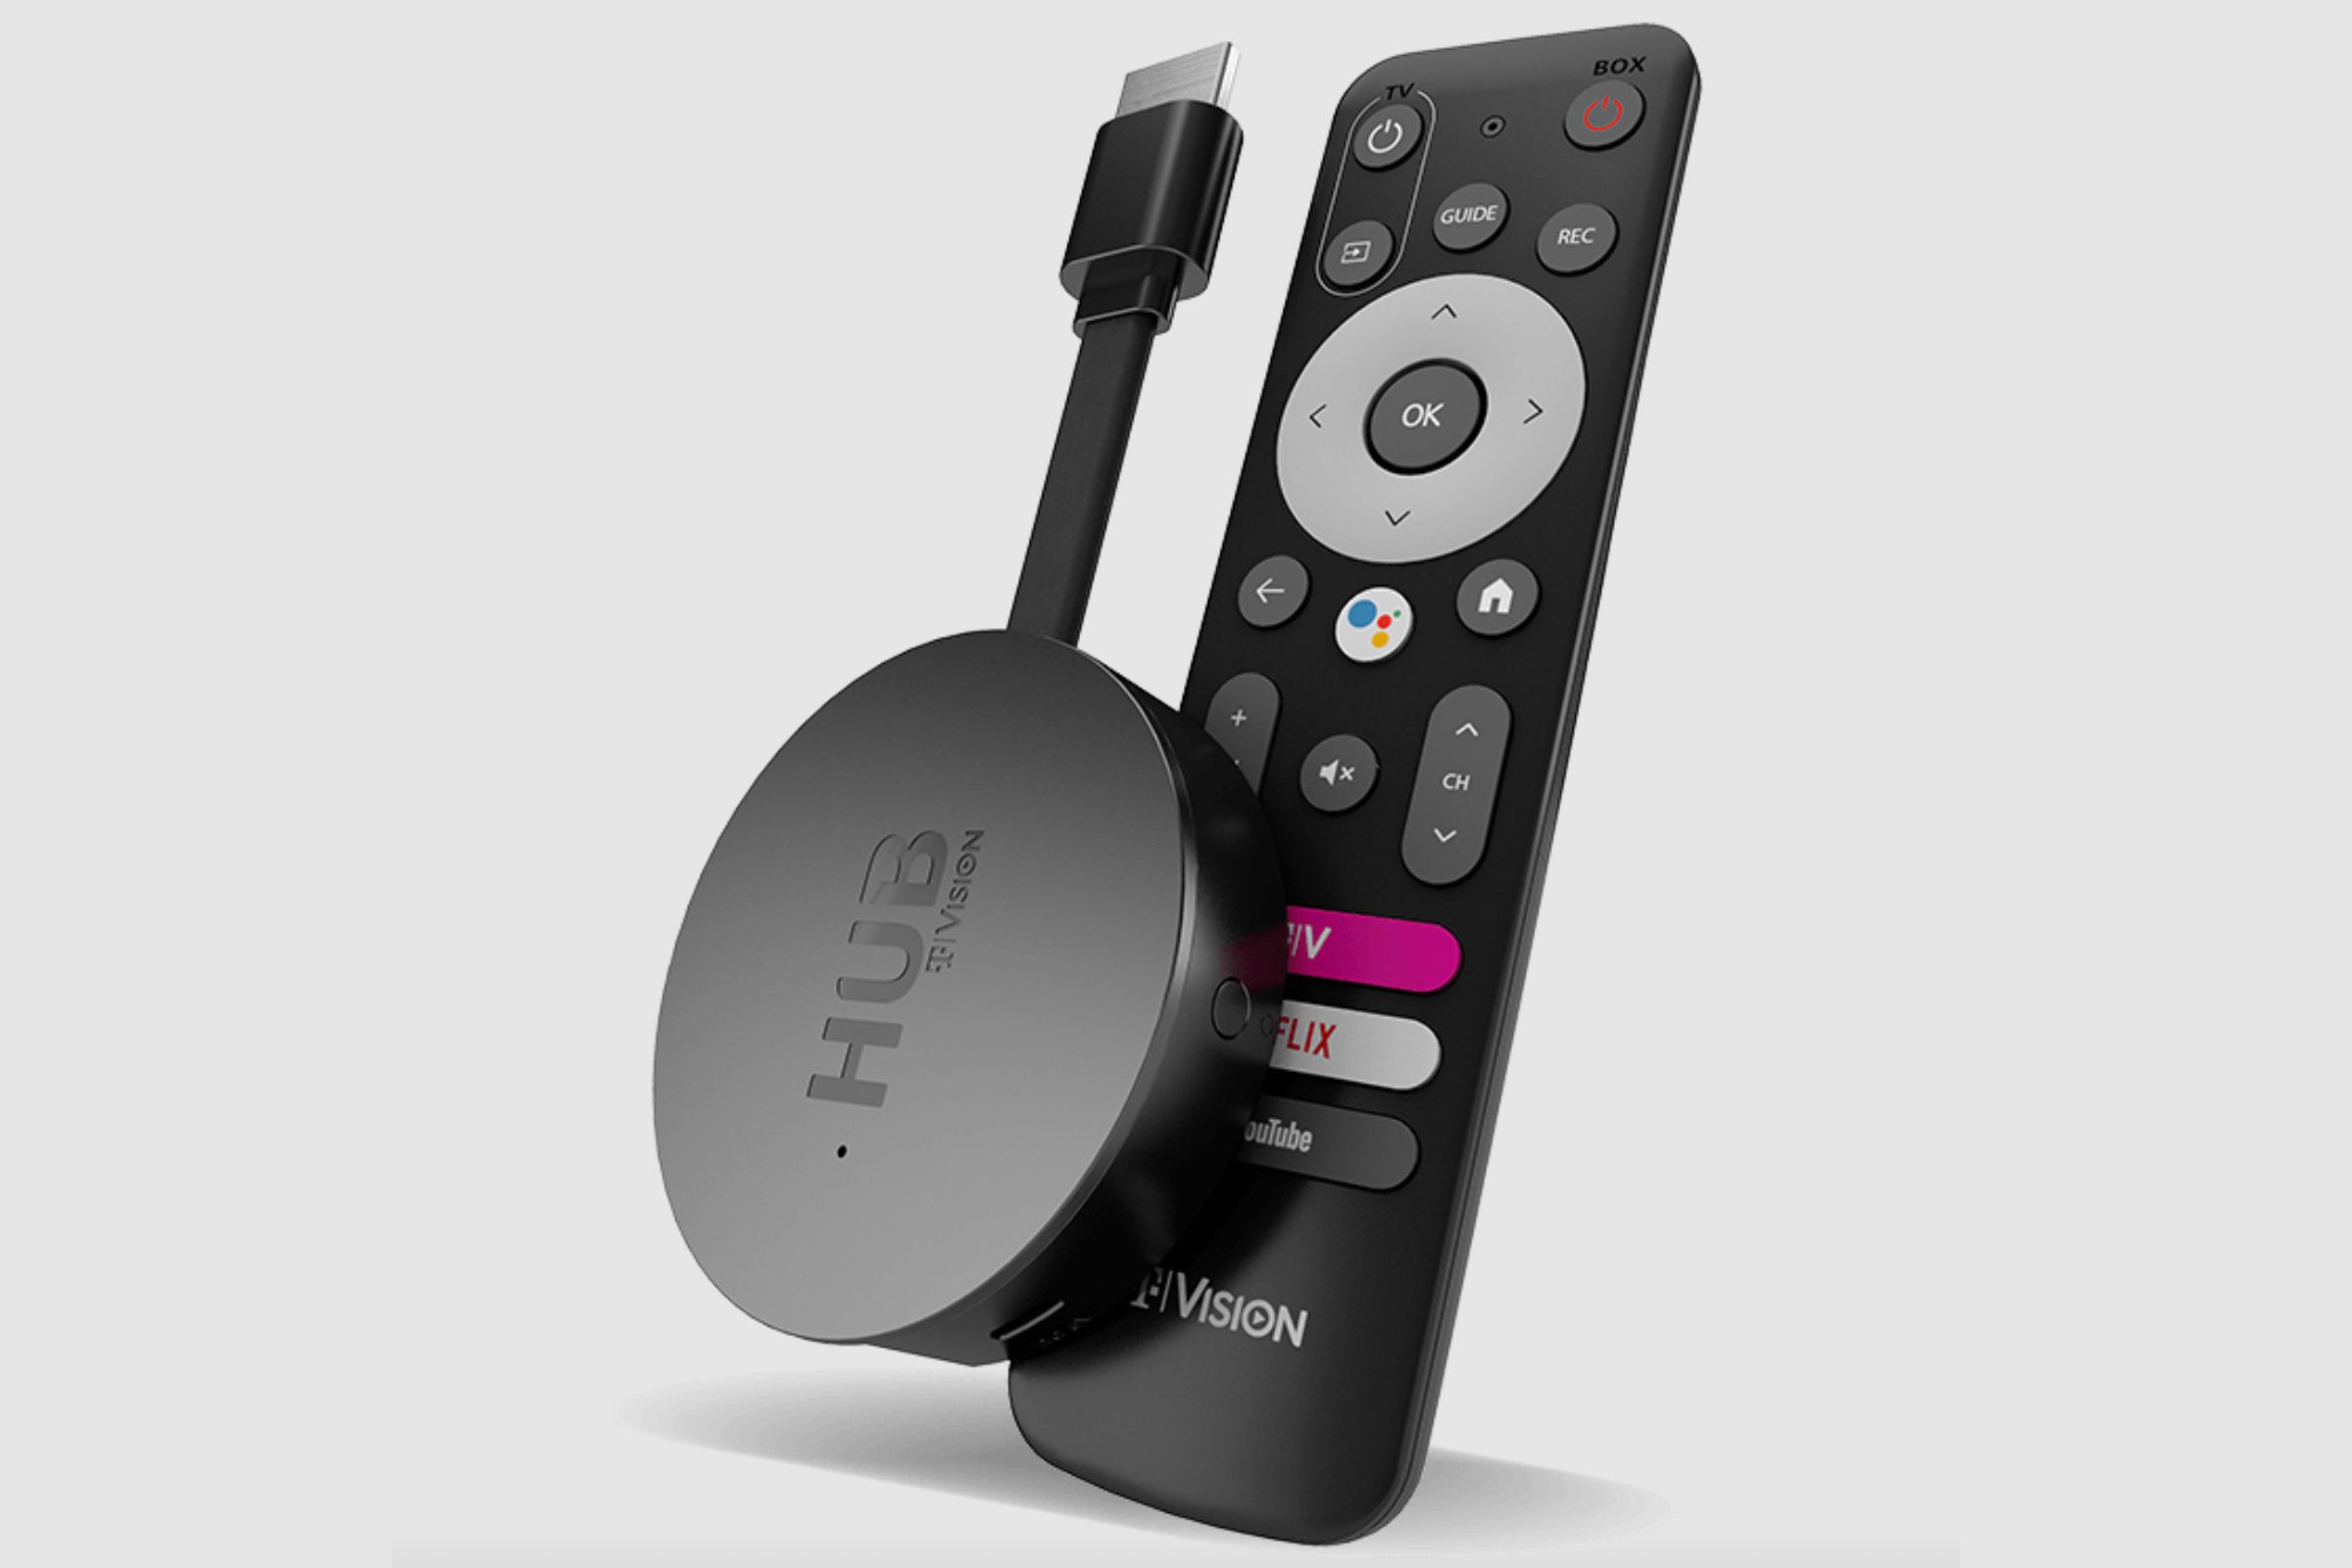 The TVision Hub offers 4K streaming and ships with a voice-control remote